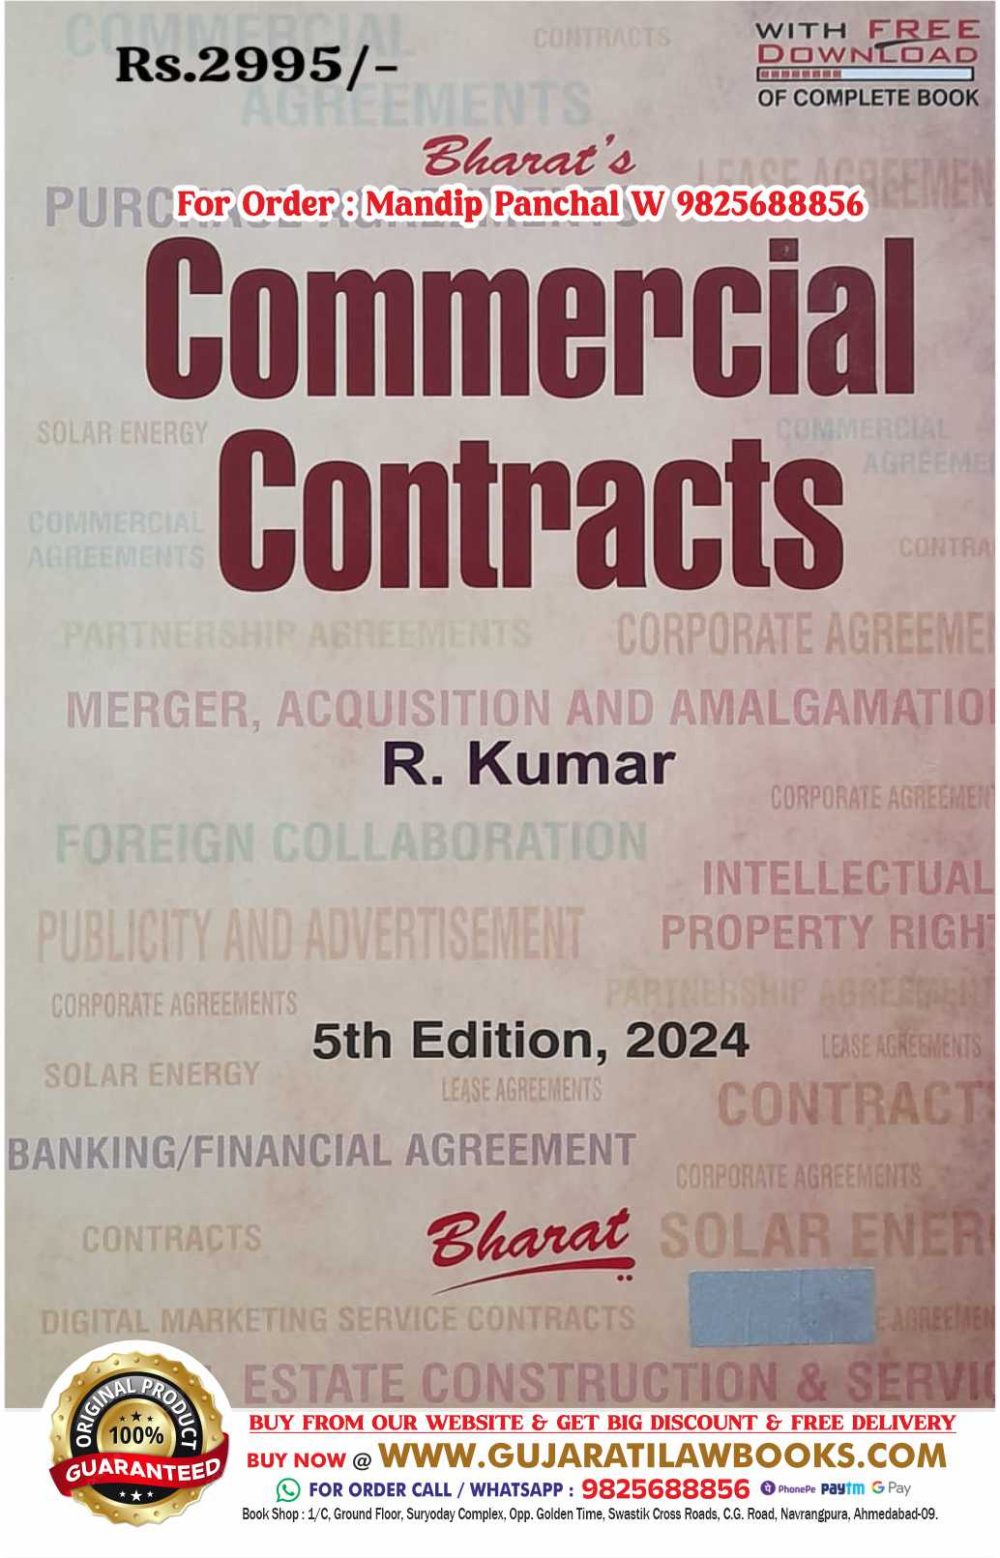 Bharat's Commercial Contracts by R Kumar - Latest 5th Edition March 2024